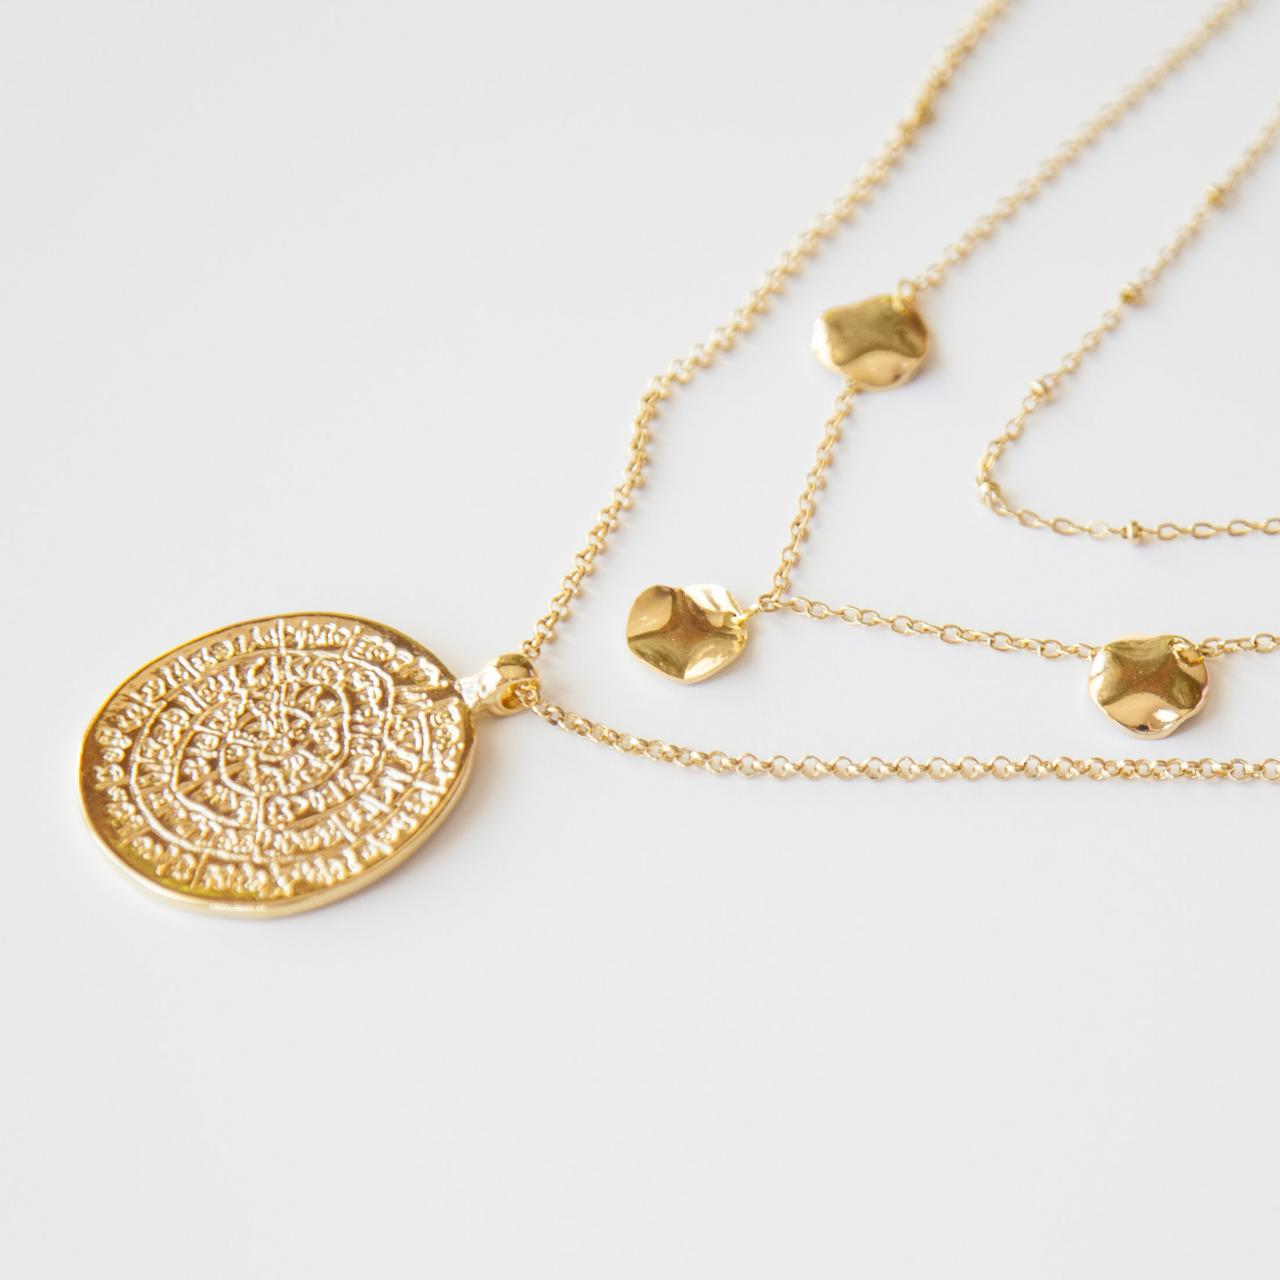 Boho Medallion Necklace, Three Layer Necklace, Boho Layered Gold Necklace, Ancient Pendant Necklace, Hammered Coins Necklace, Long Necklace